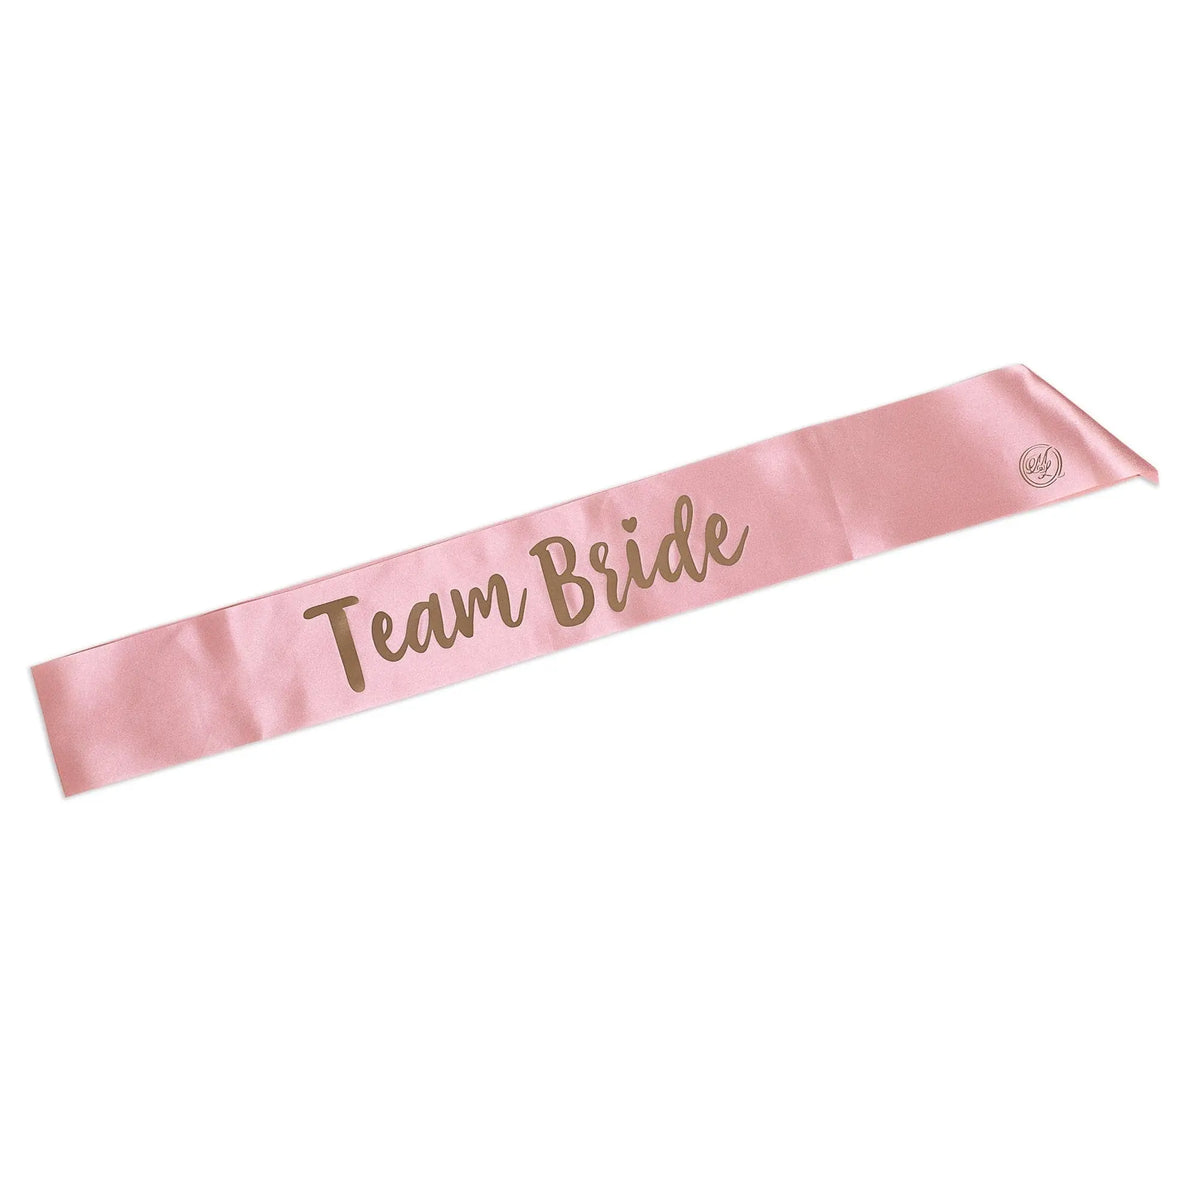 Mrs... At Last! Bridal Party Sashes Set for Bachelorette Party, Bridal Shower, Wedding Shower - Luxury, Quality Feel, Well-Made, White and Rose Gold Color, Gold Foil Lettering, Fits Most Body Types - Mrs... At Last!